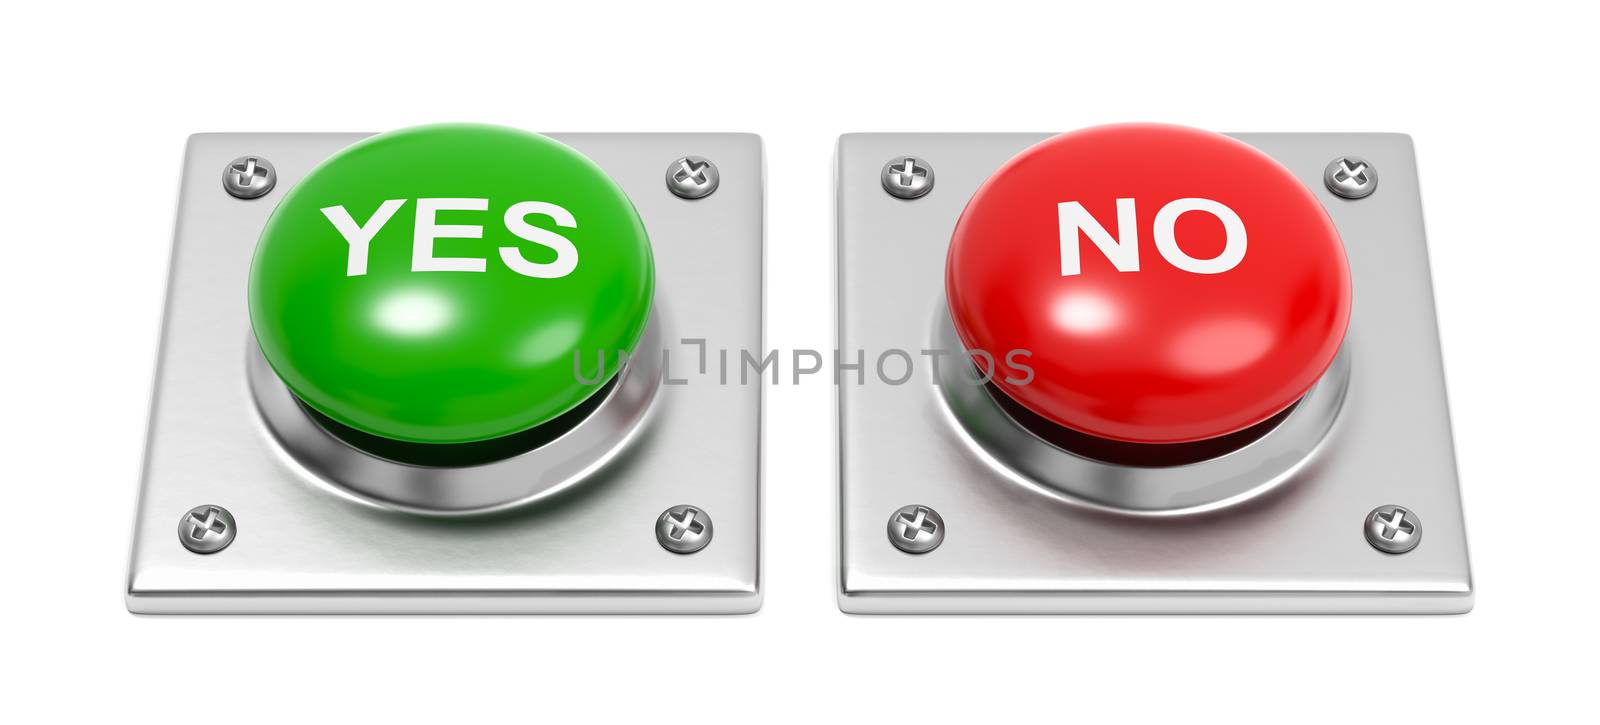 Yes Green Button and No Red Button on White Background 3D Illustration